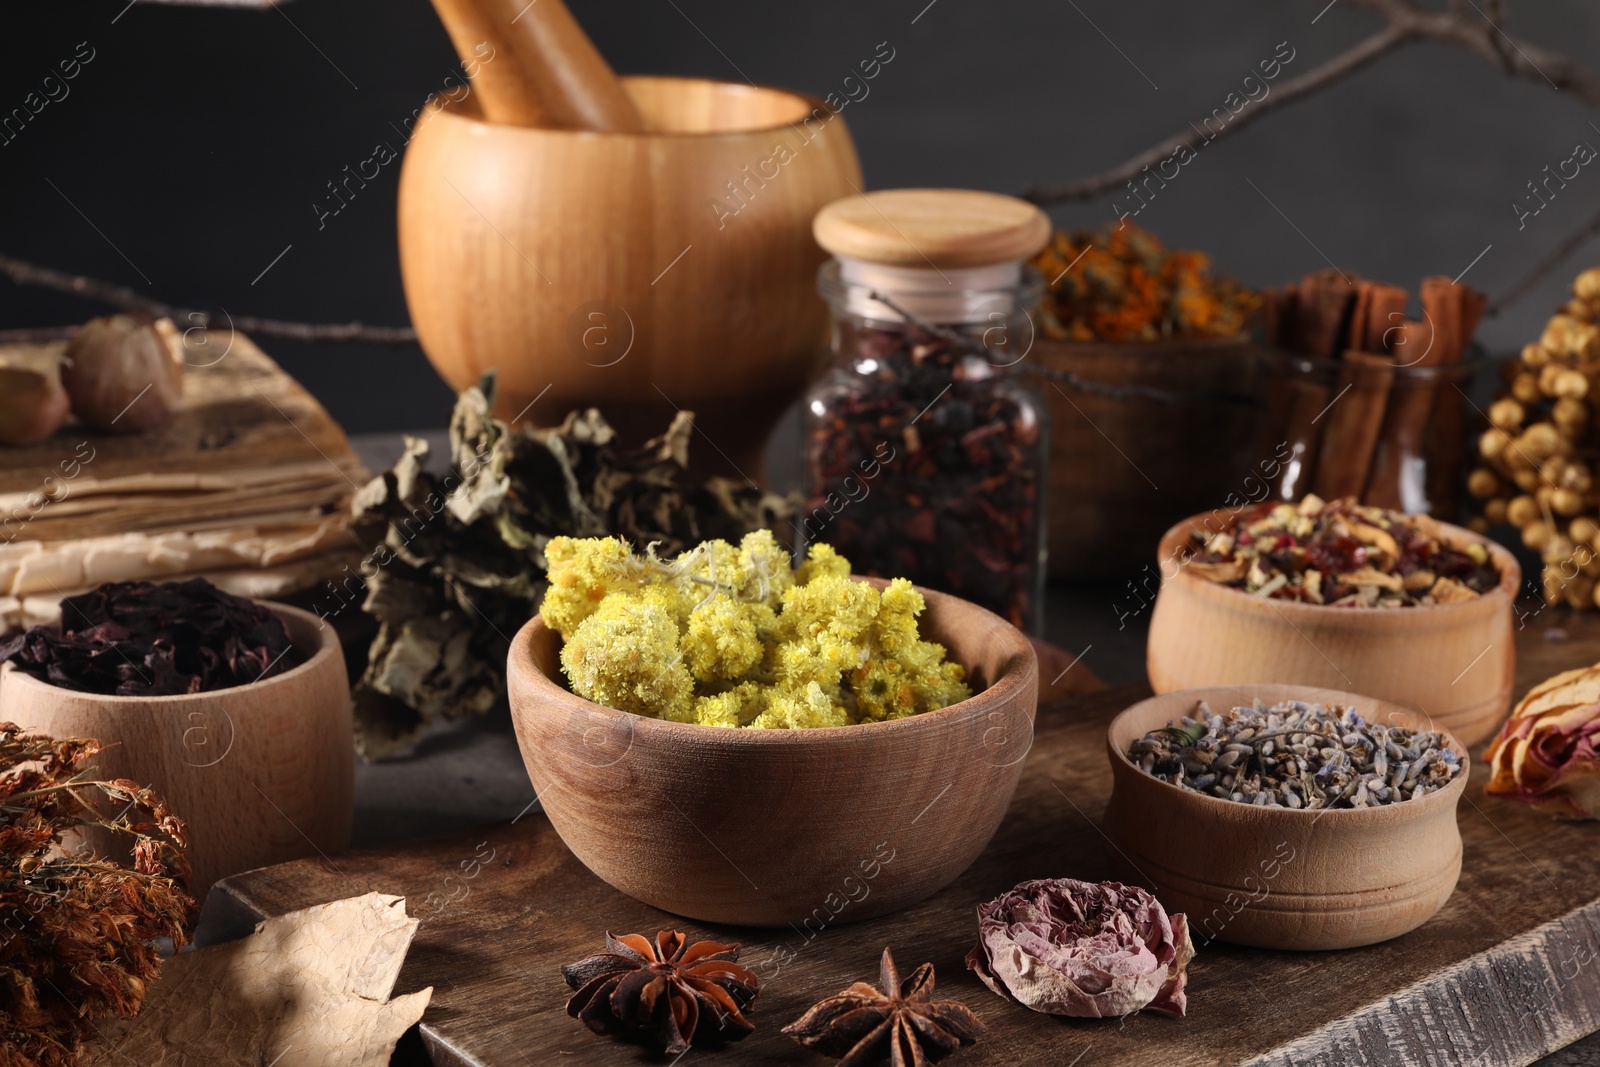 Photo of Many different dry herbs, flowers and mortar with pestle on table